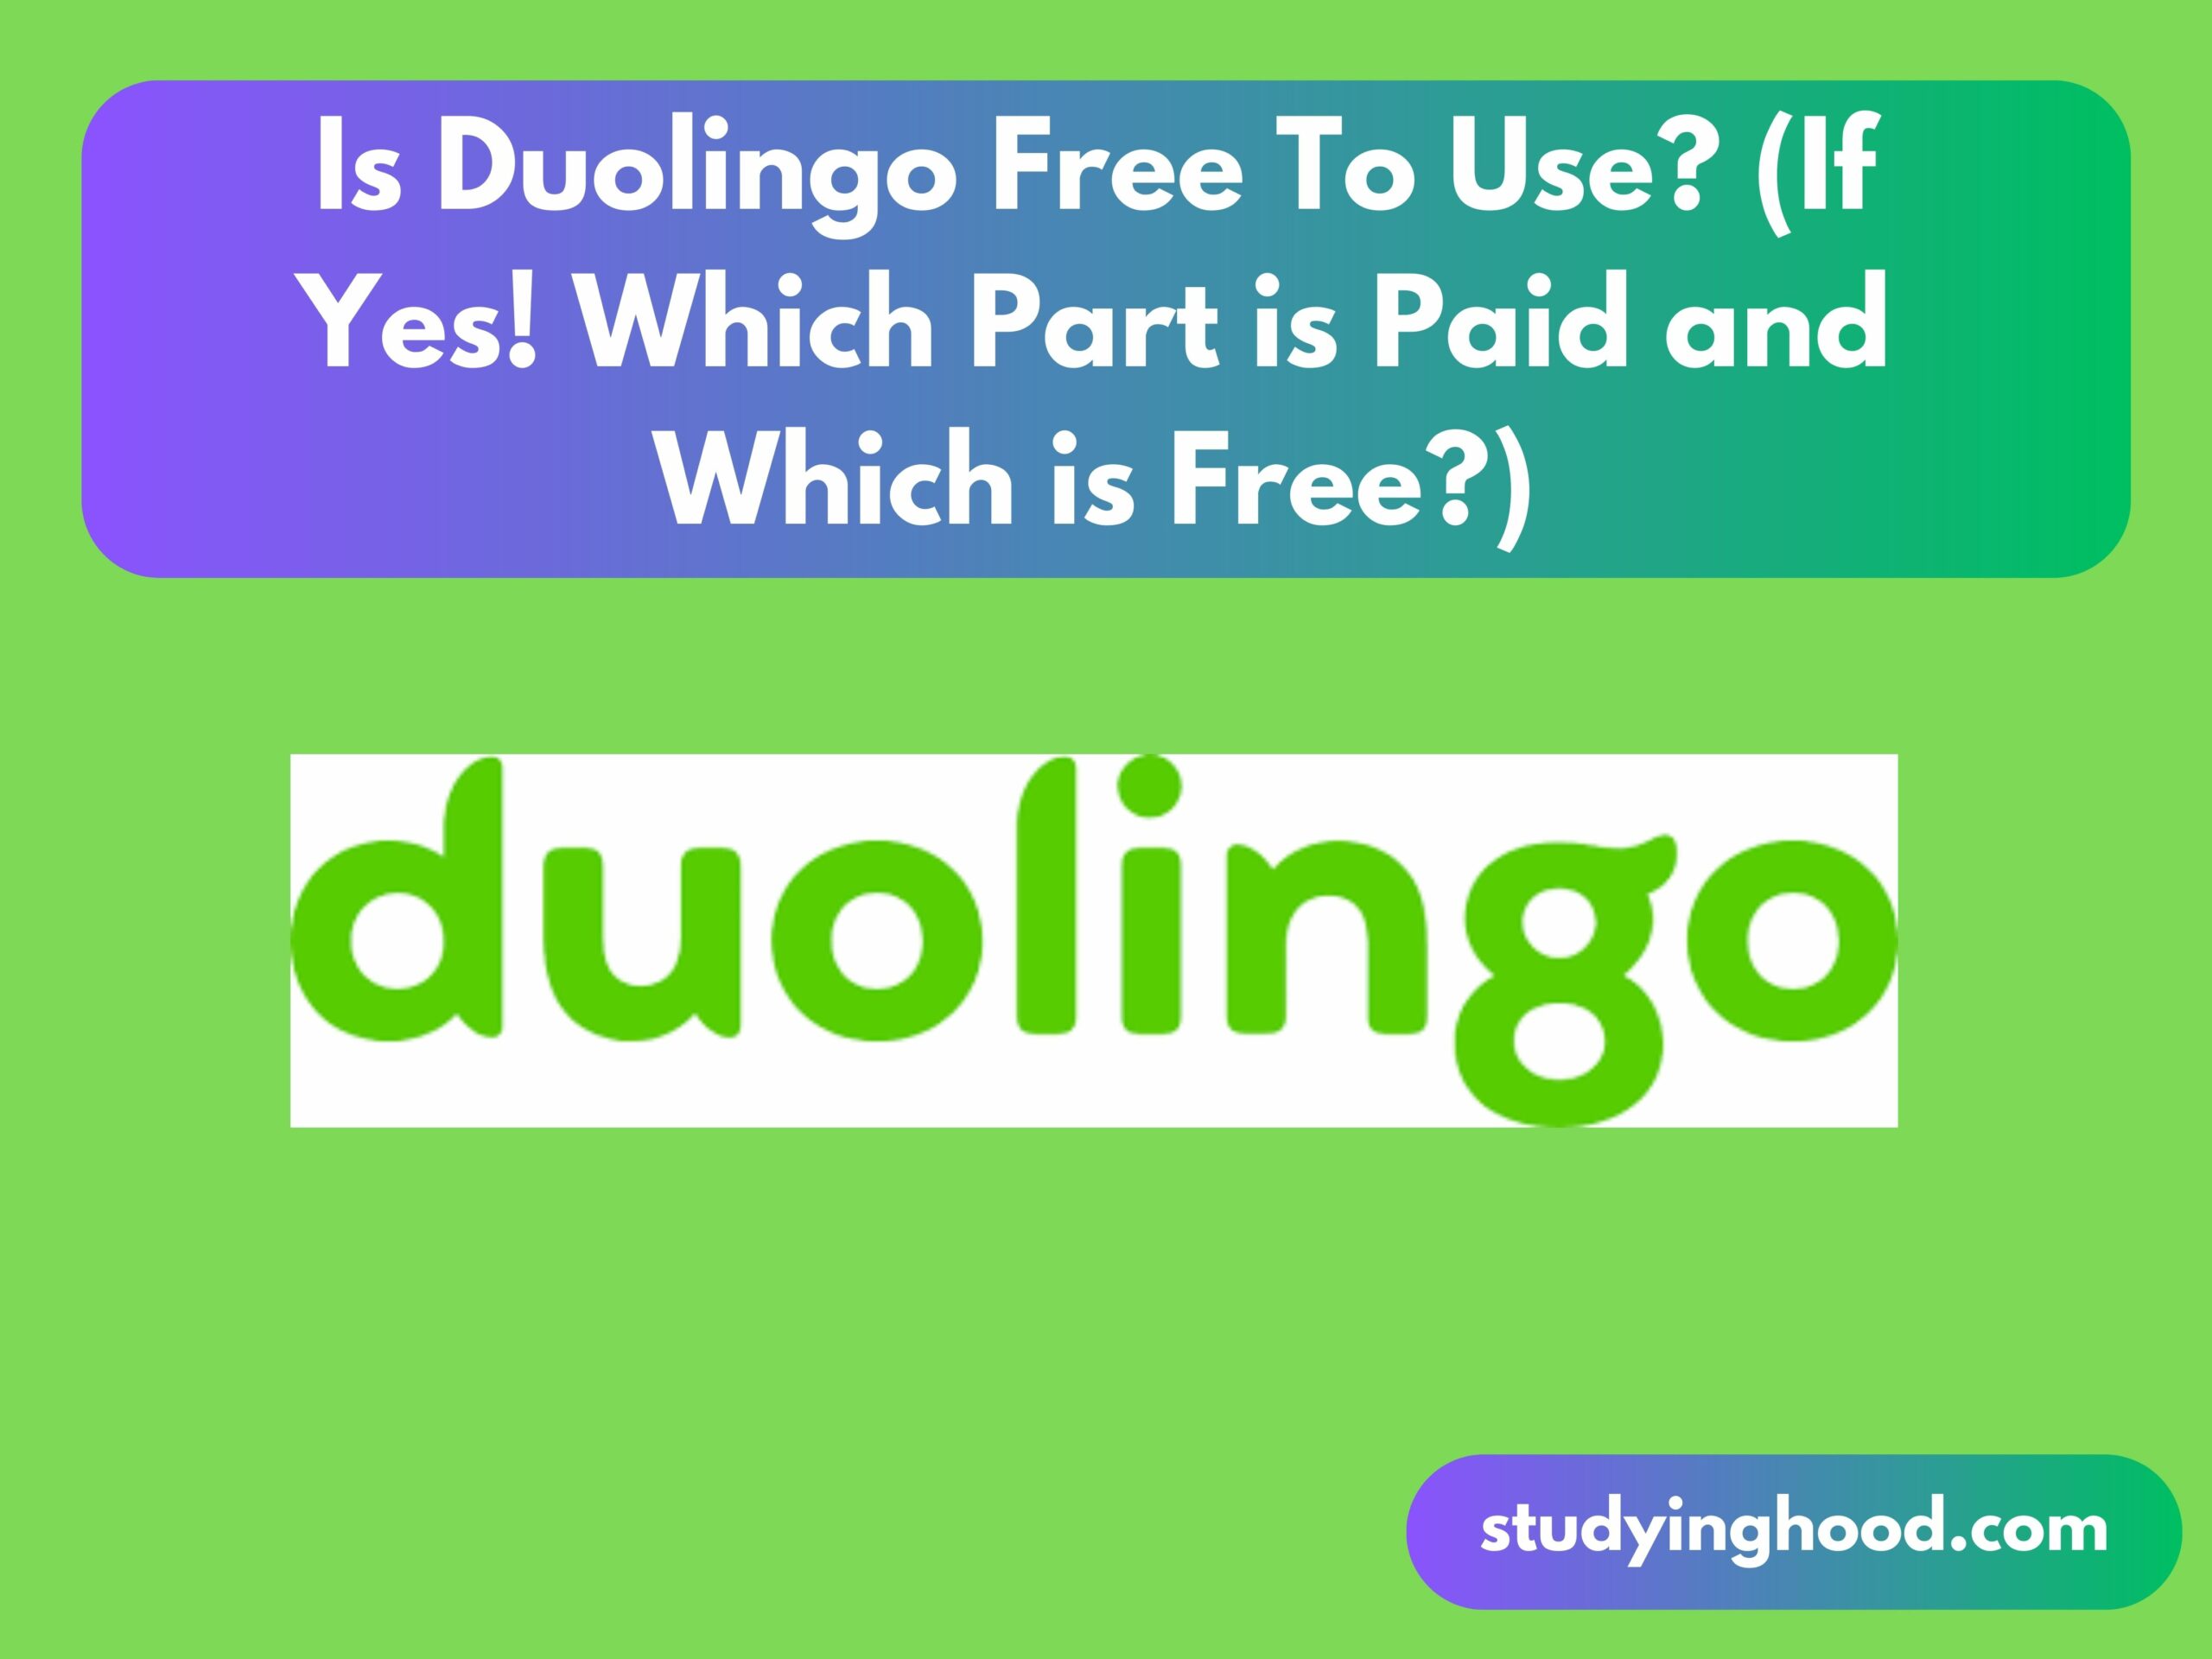 Is Duolingo Free To Use (If Yes! Which Part is Paid and Which is Free)